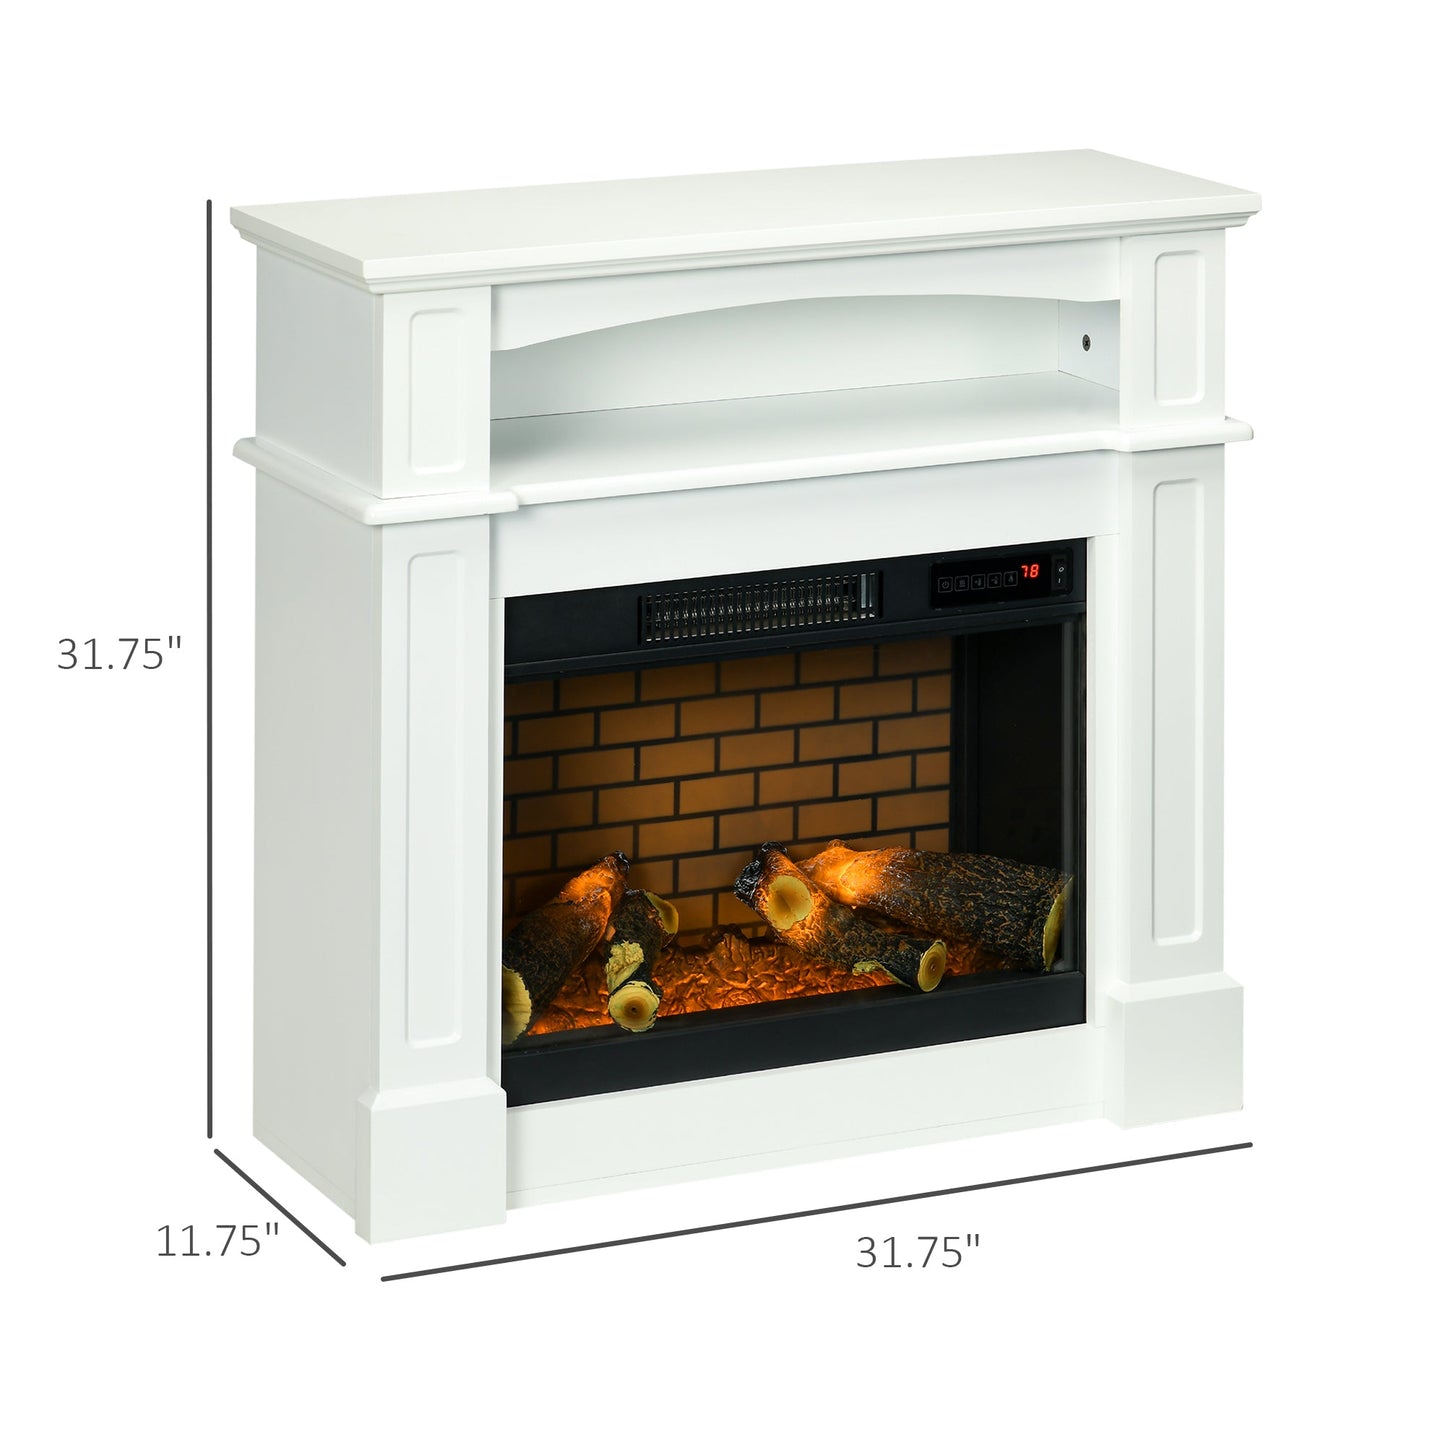 Miscellaneous-32" Electric Fireplace with Mantel, Free Standing Electric Fireplace with LED Log Flame, Shelf and Remote Control, 1400W, White - Outdoor Style Company